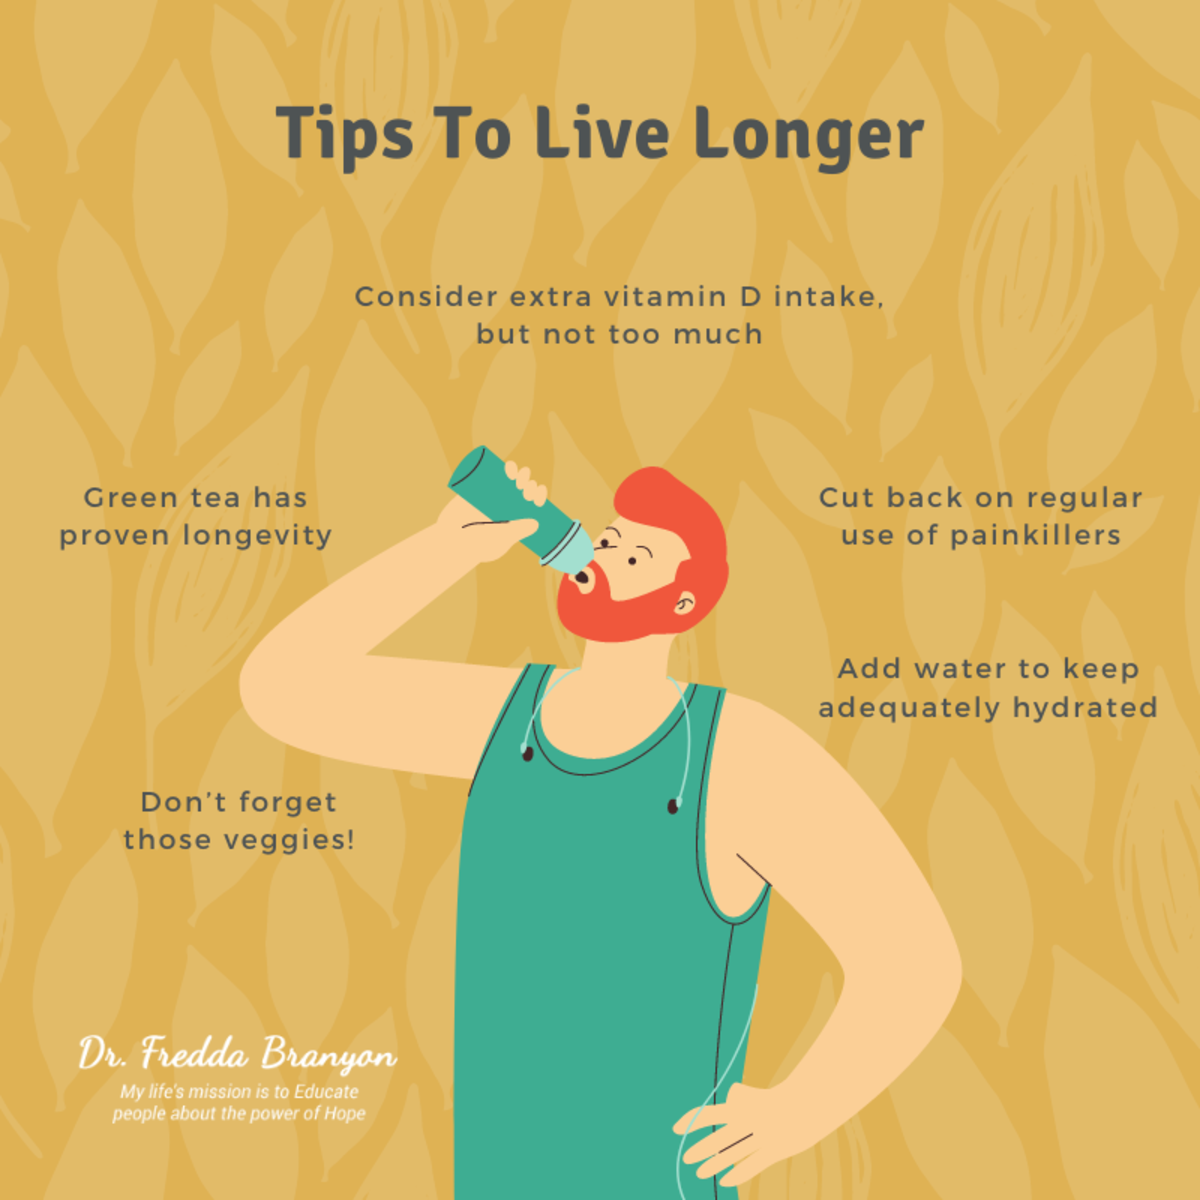 30+ Ways to Live Longer: Get Intimate, Save Pennies, & More